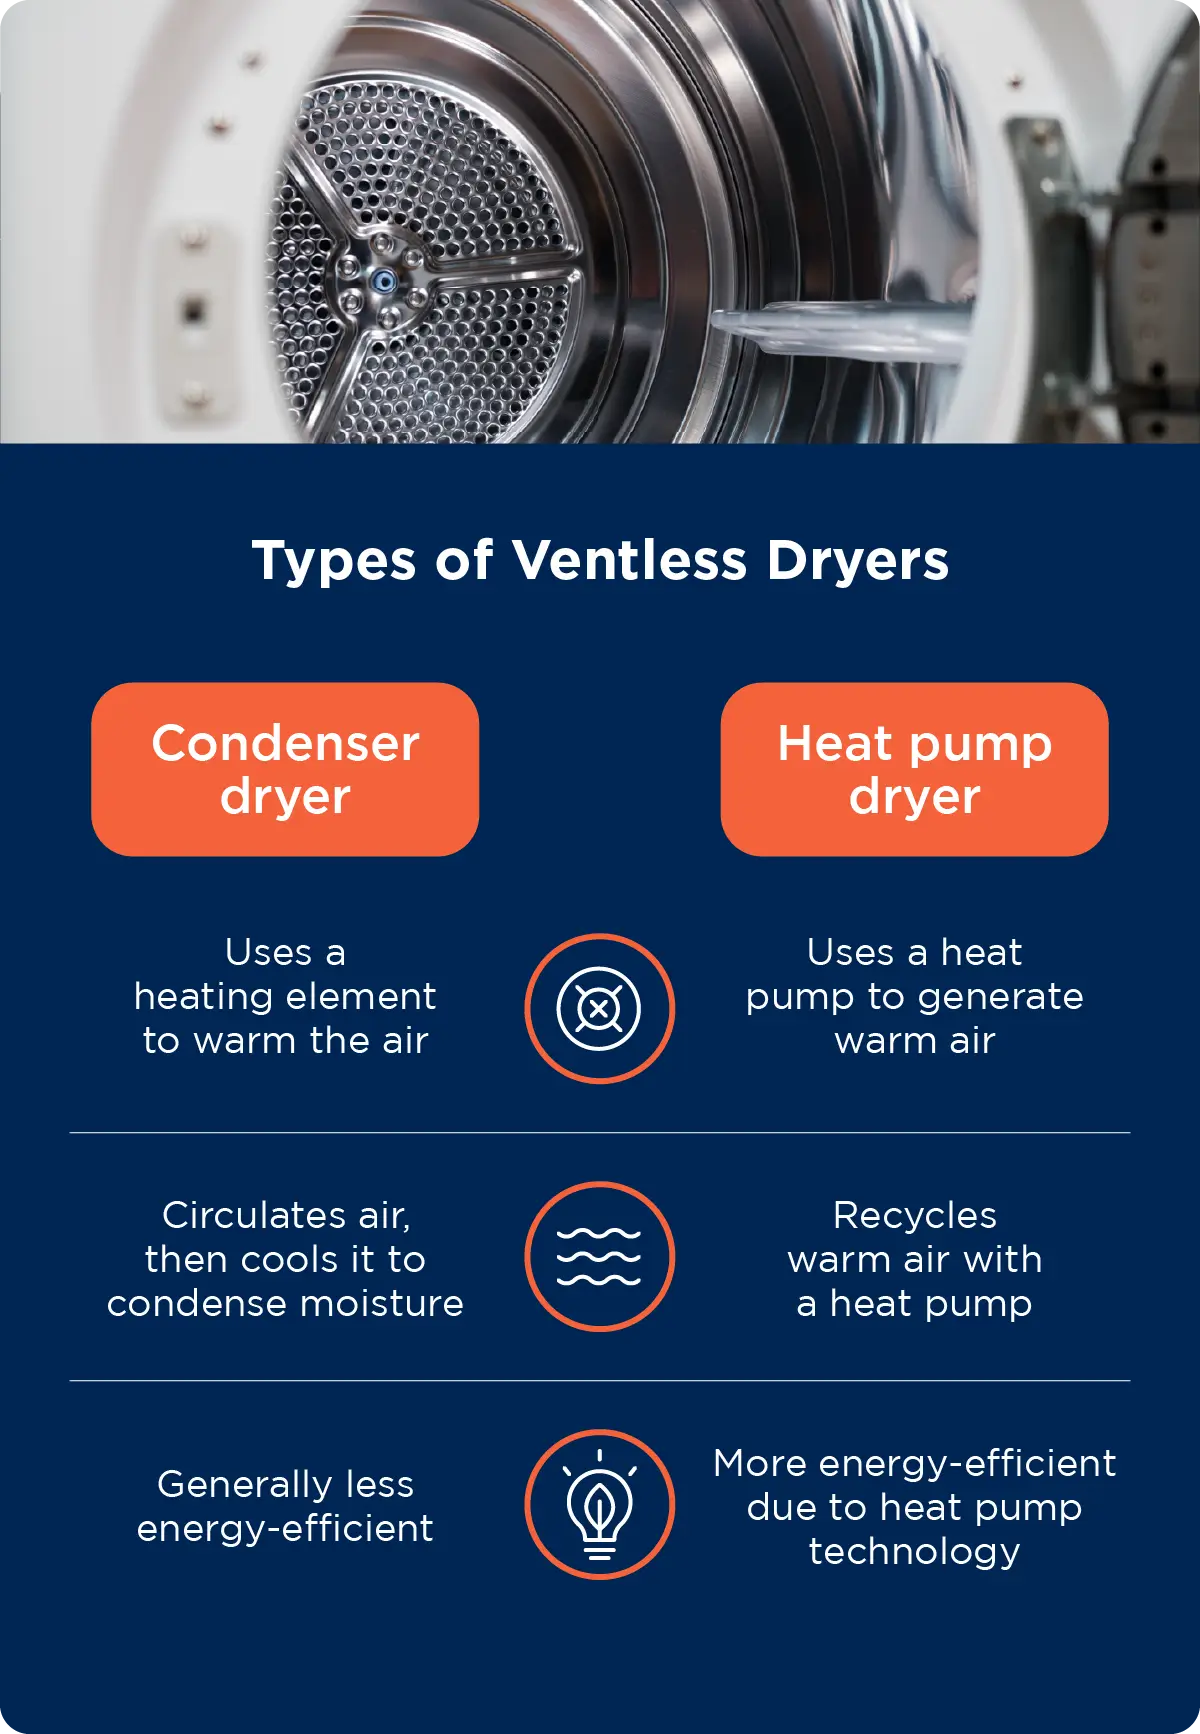 How much energy does a tumble dryer use? Alternative ways to dry